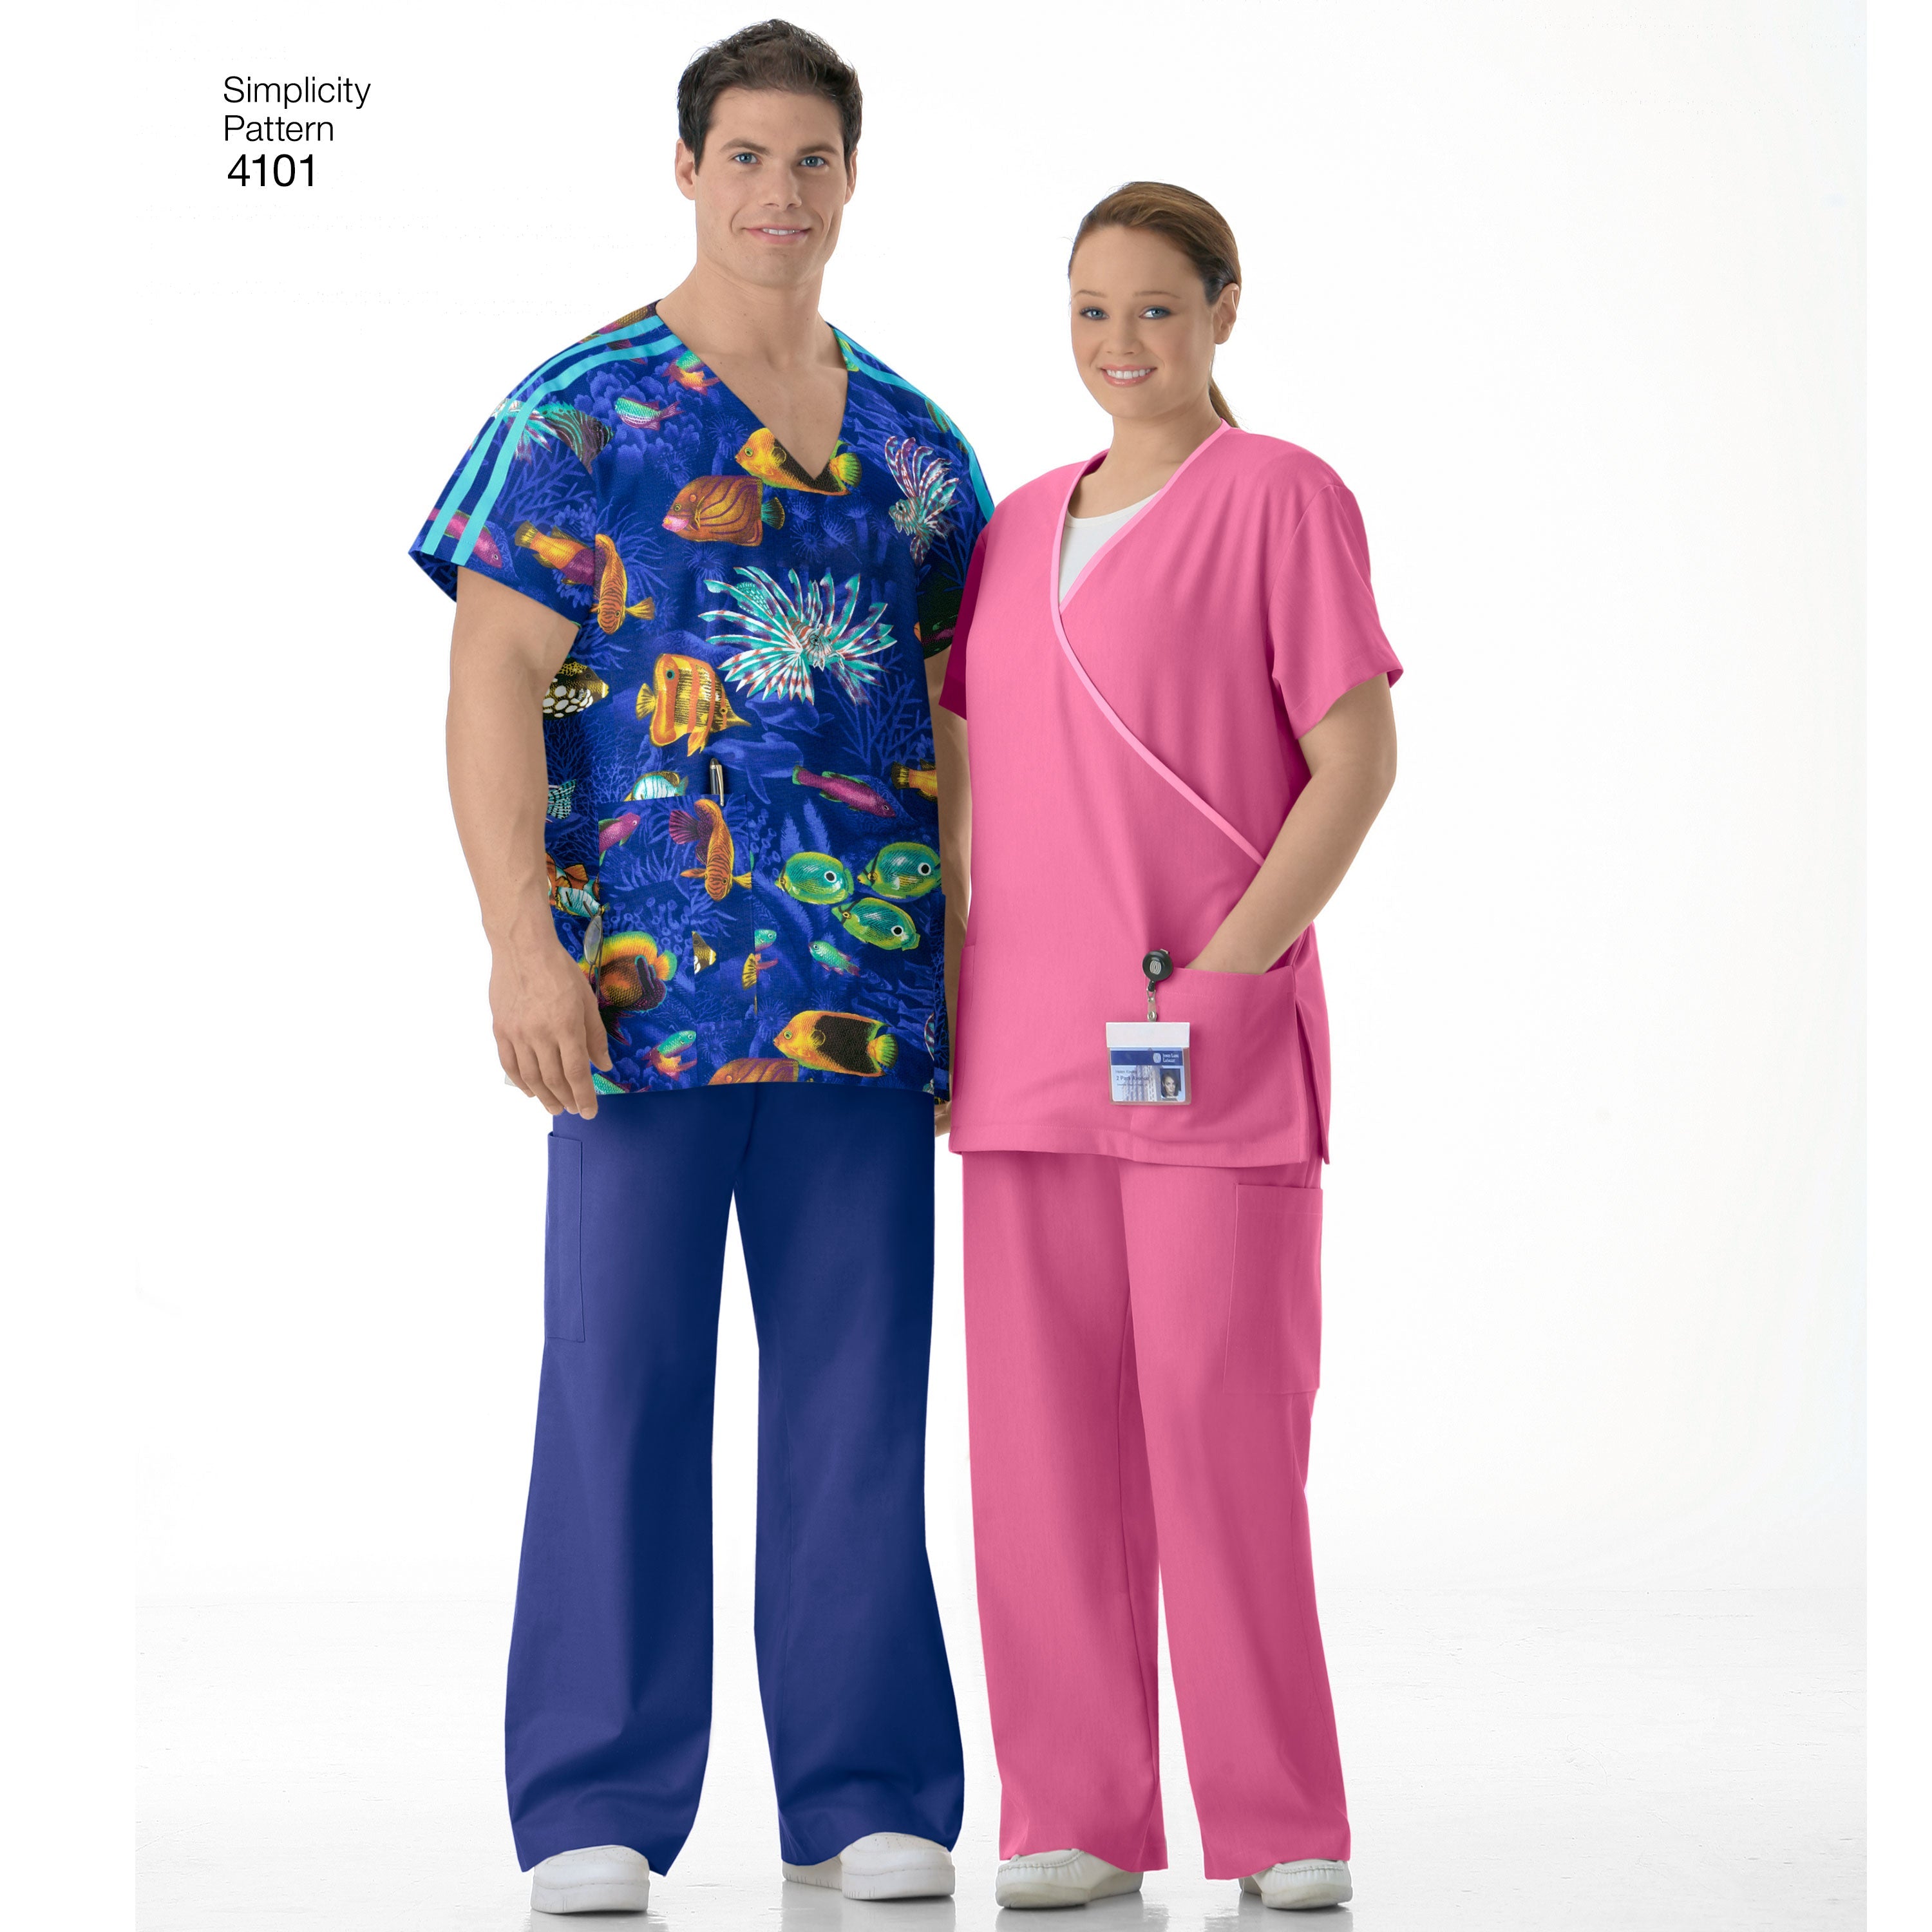 Simplicity 4101  Unisex Uniform: Scrubs pattern from Jaycotts Sewing Supplies